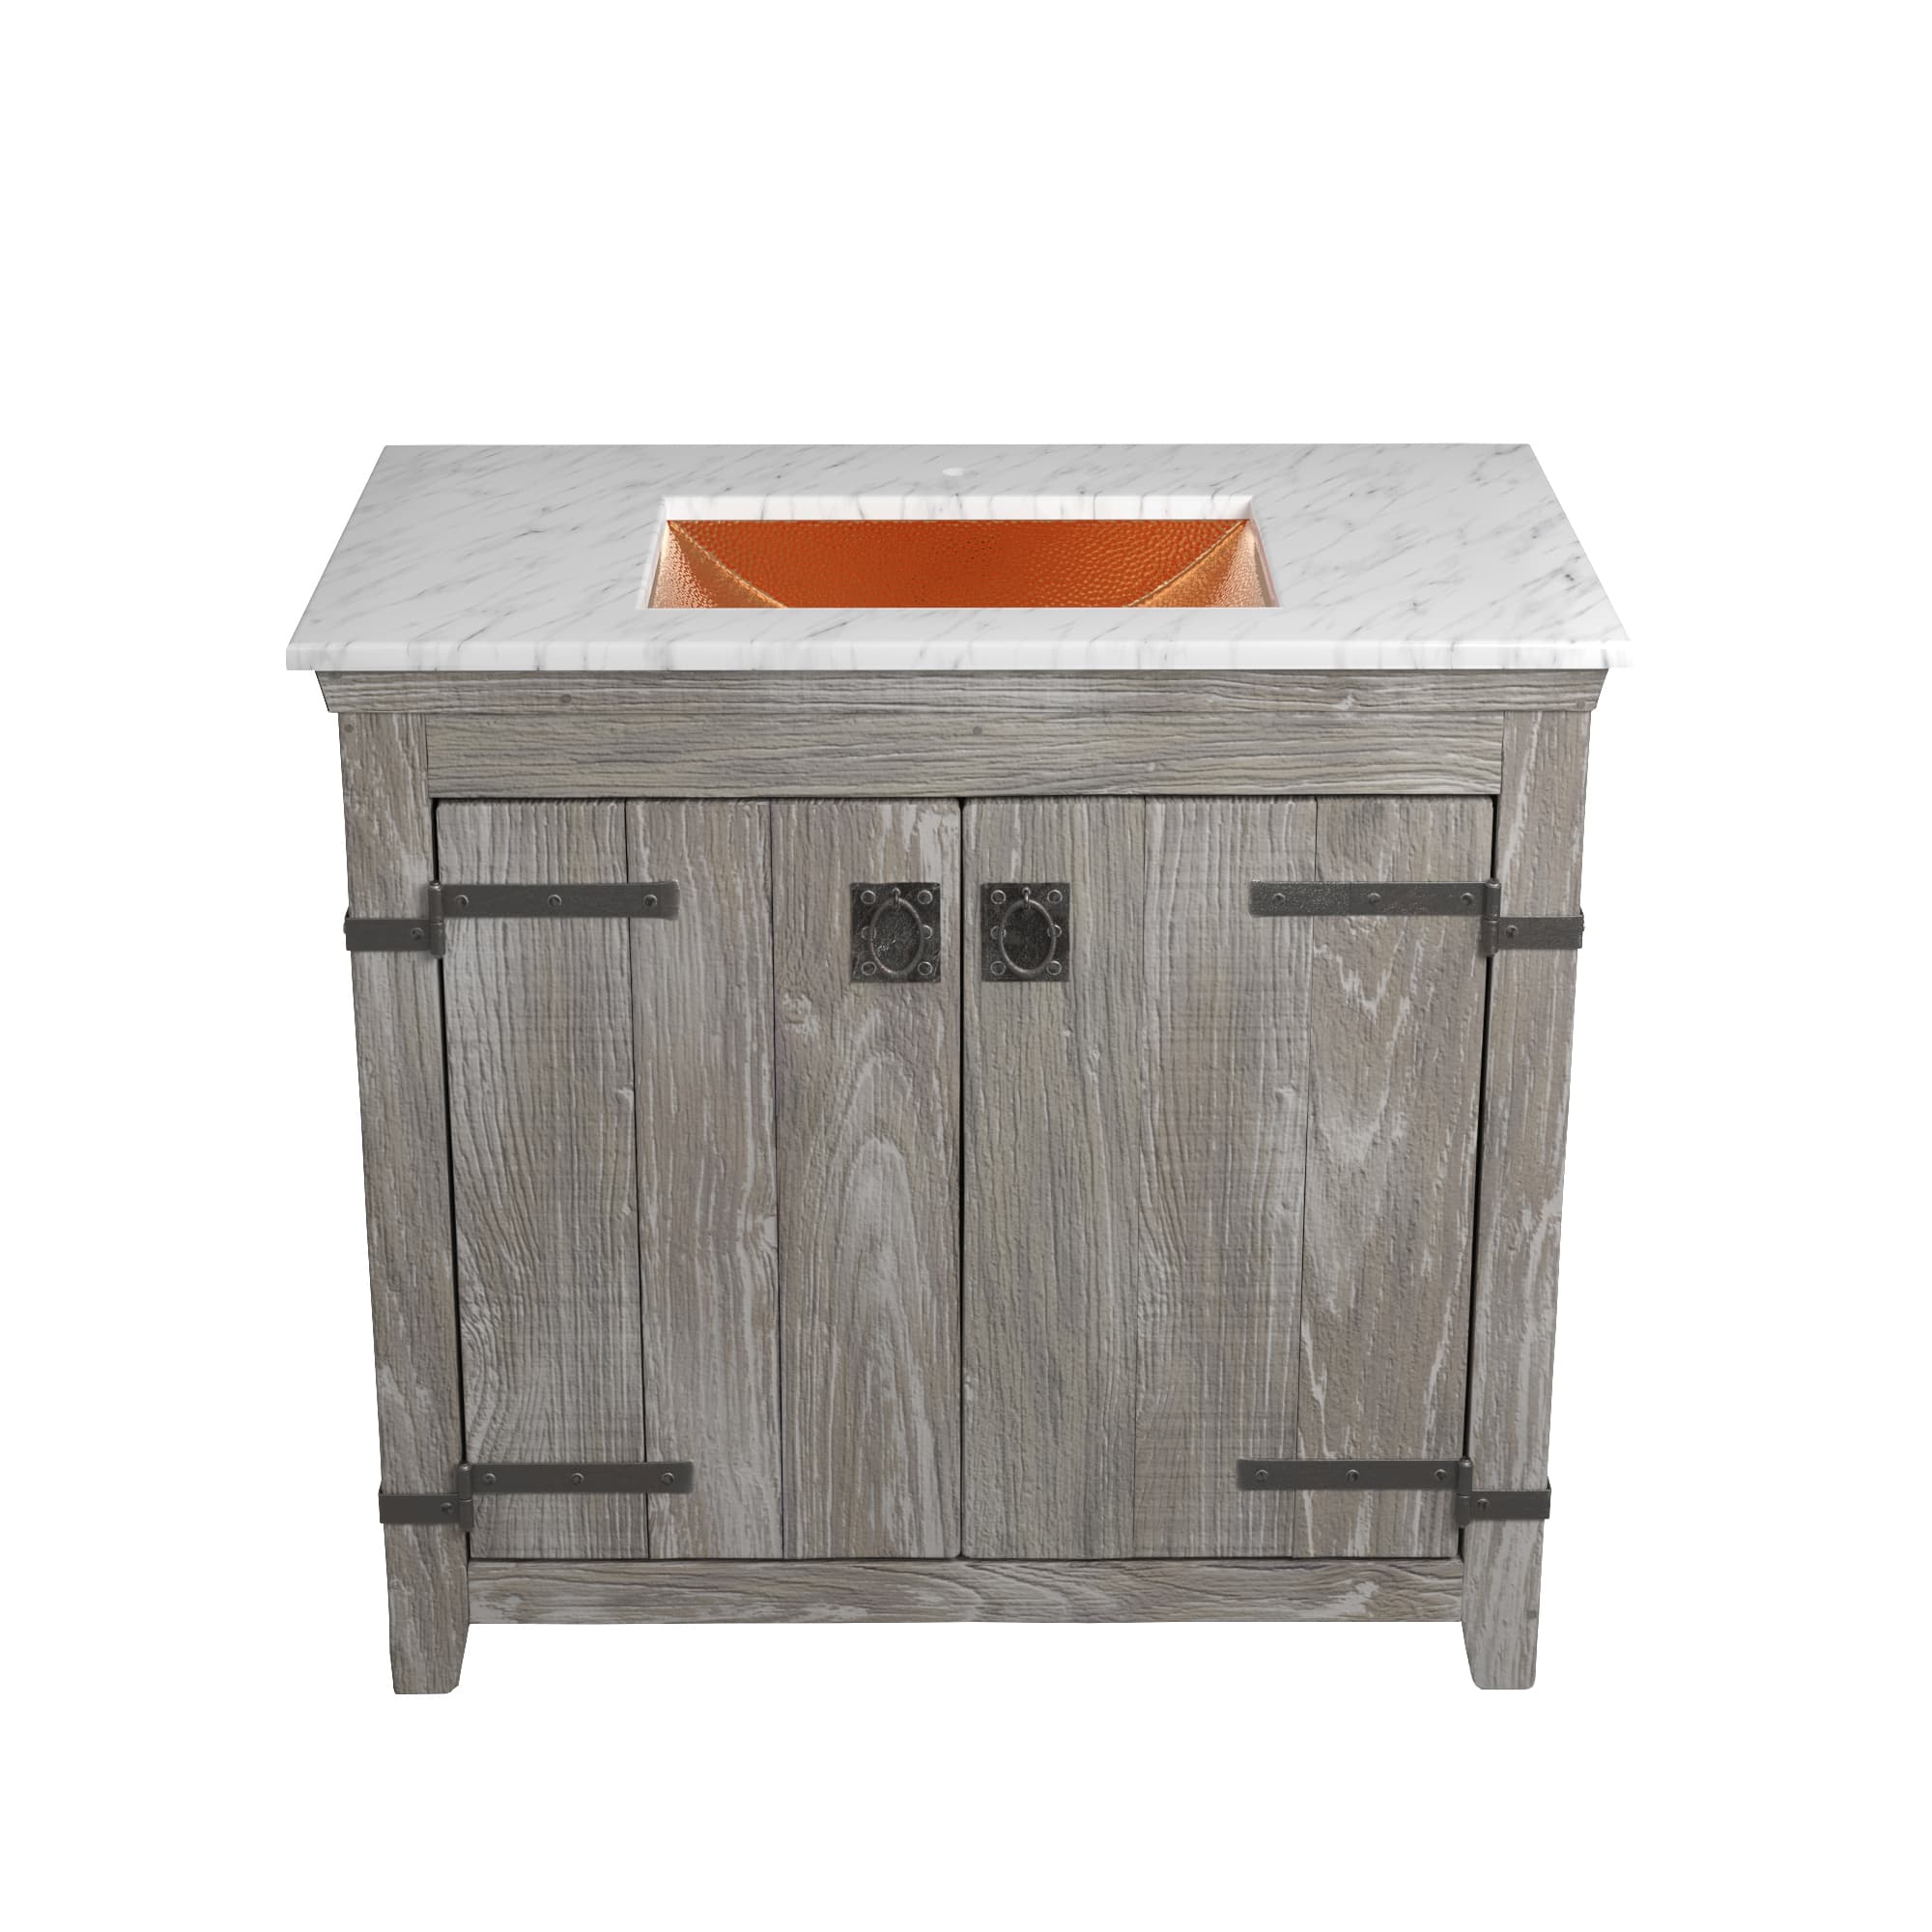 Native Trails 36" Americana Vanity in Driftwood with Carrara Marble Top and Avila in Polished Copper, Single Faucet Hole, BND36-VB-CT-CP-015